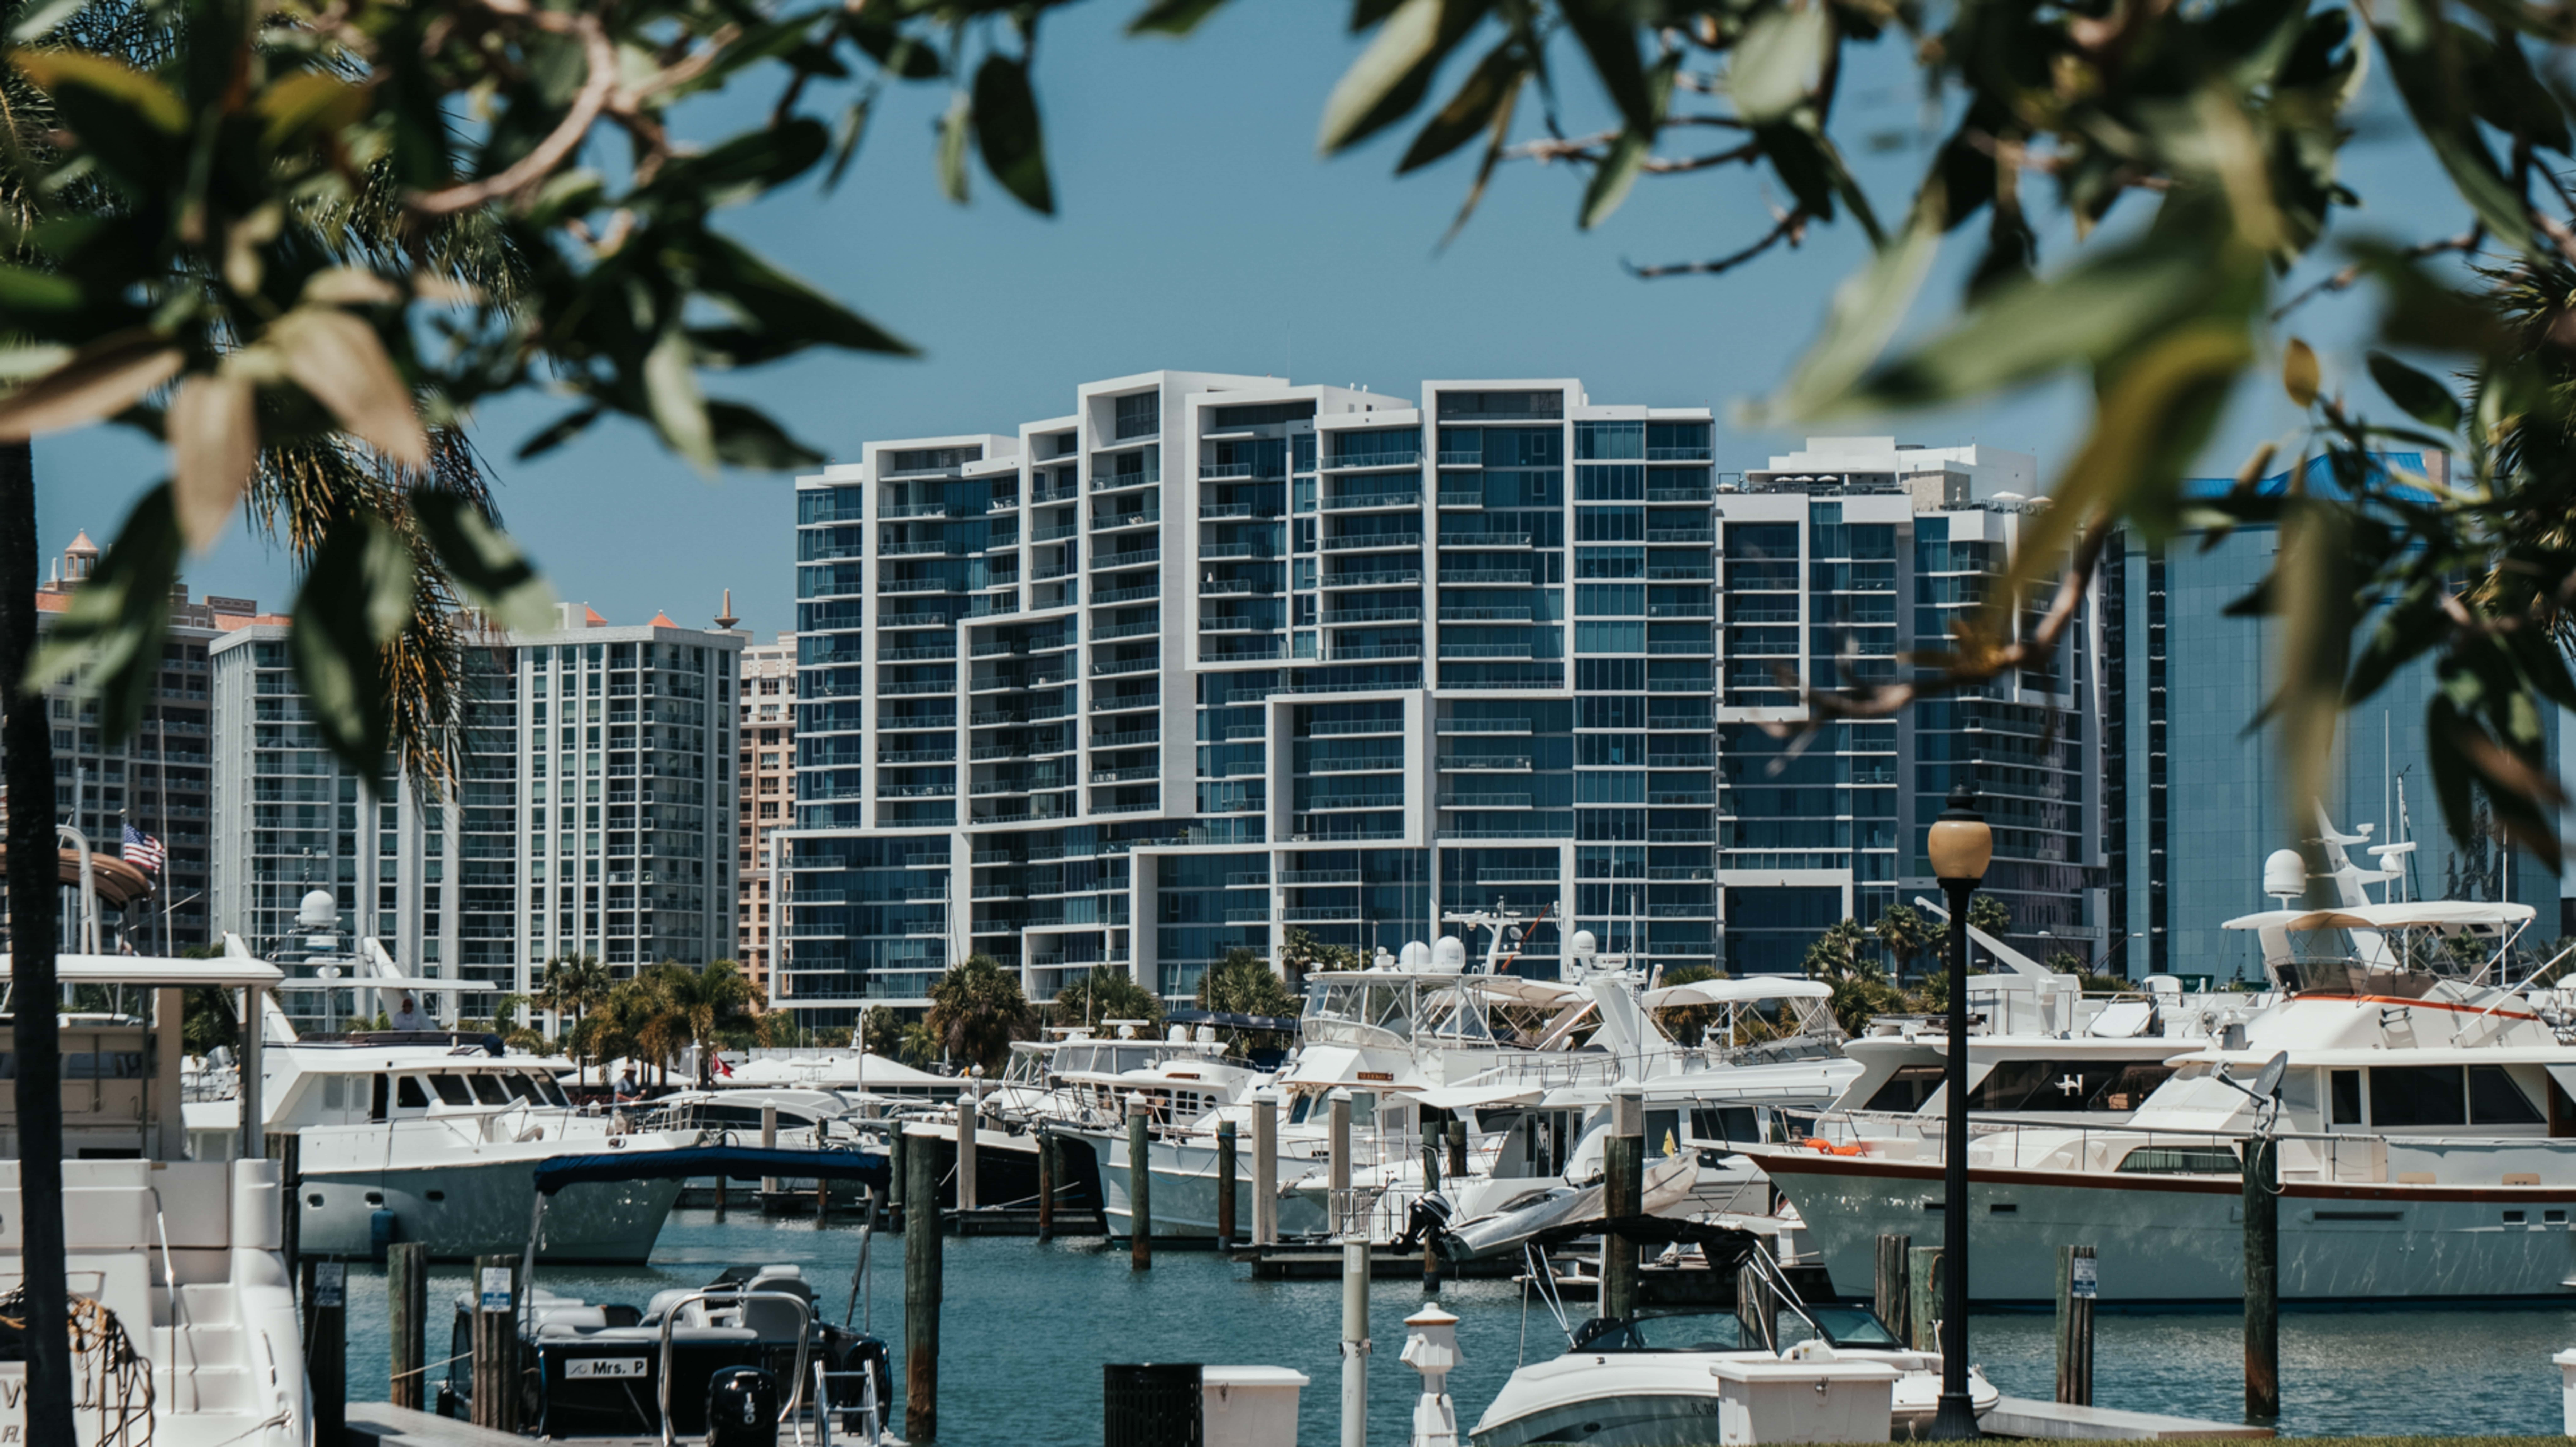 Boats at a crowded marina in Sarasota with uniquely geometric high-rise condos in the distance